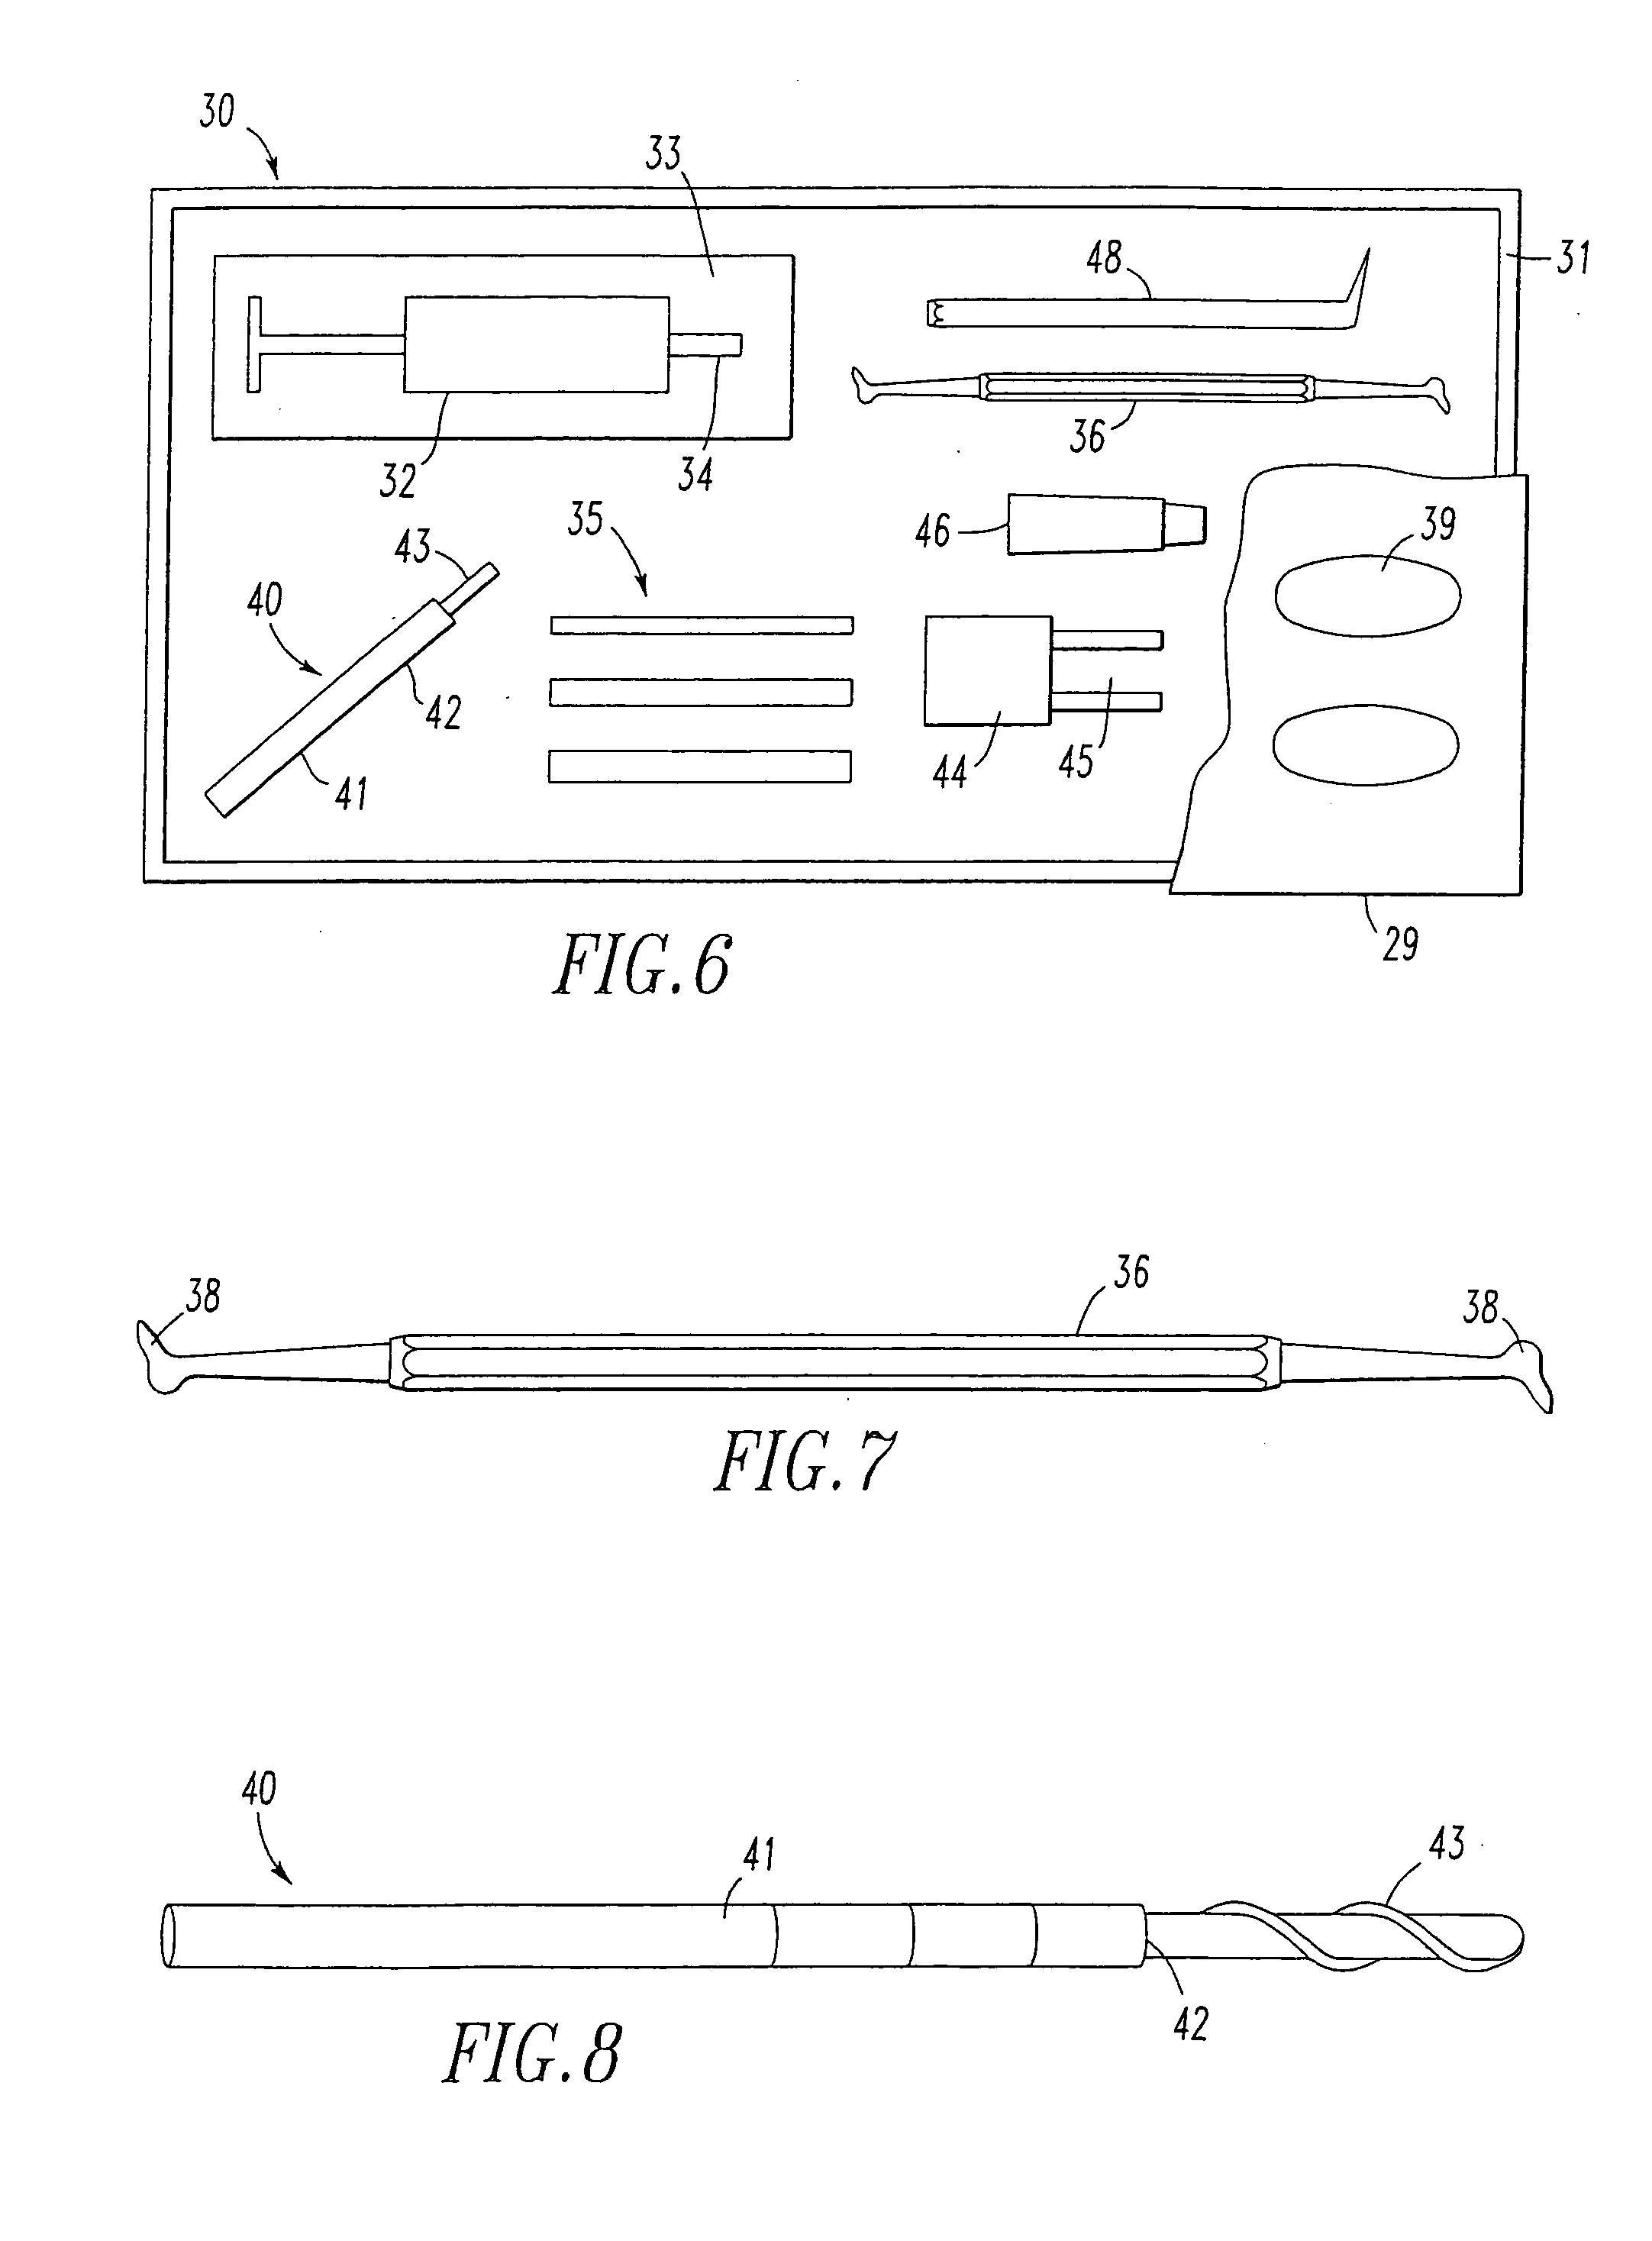 Periodontal regeneration composition and method of using same